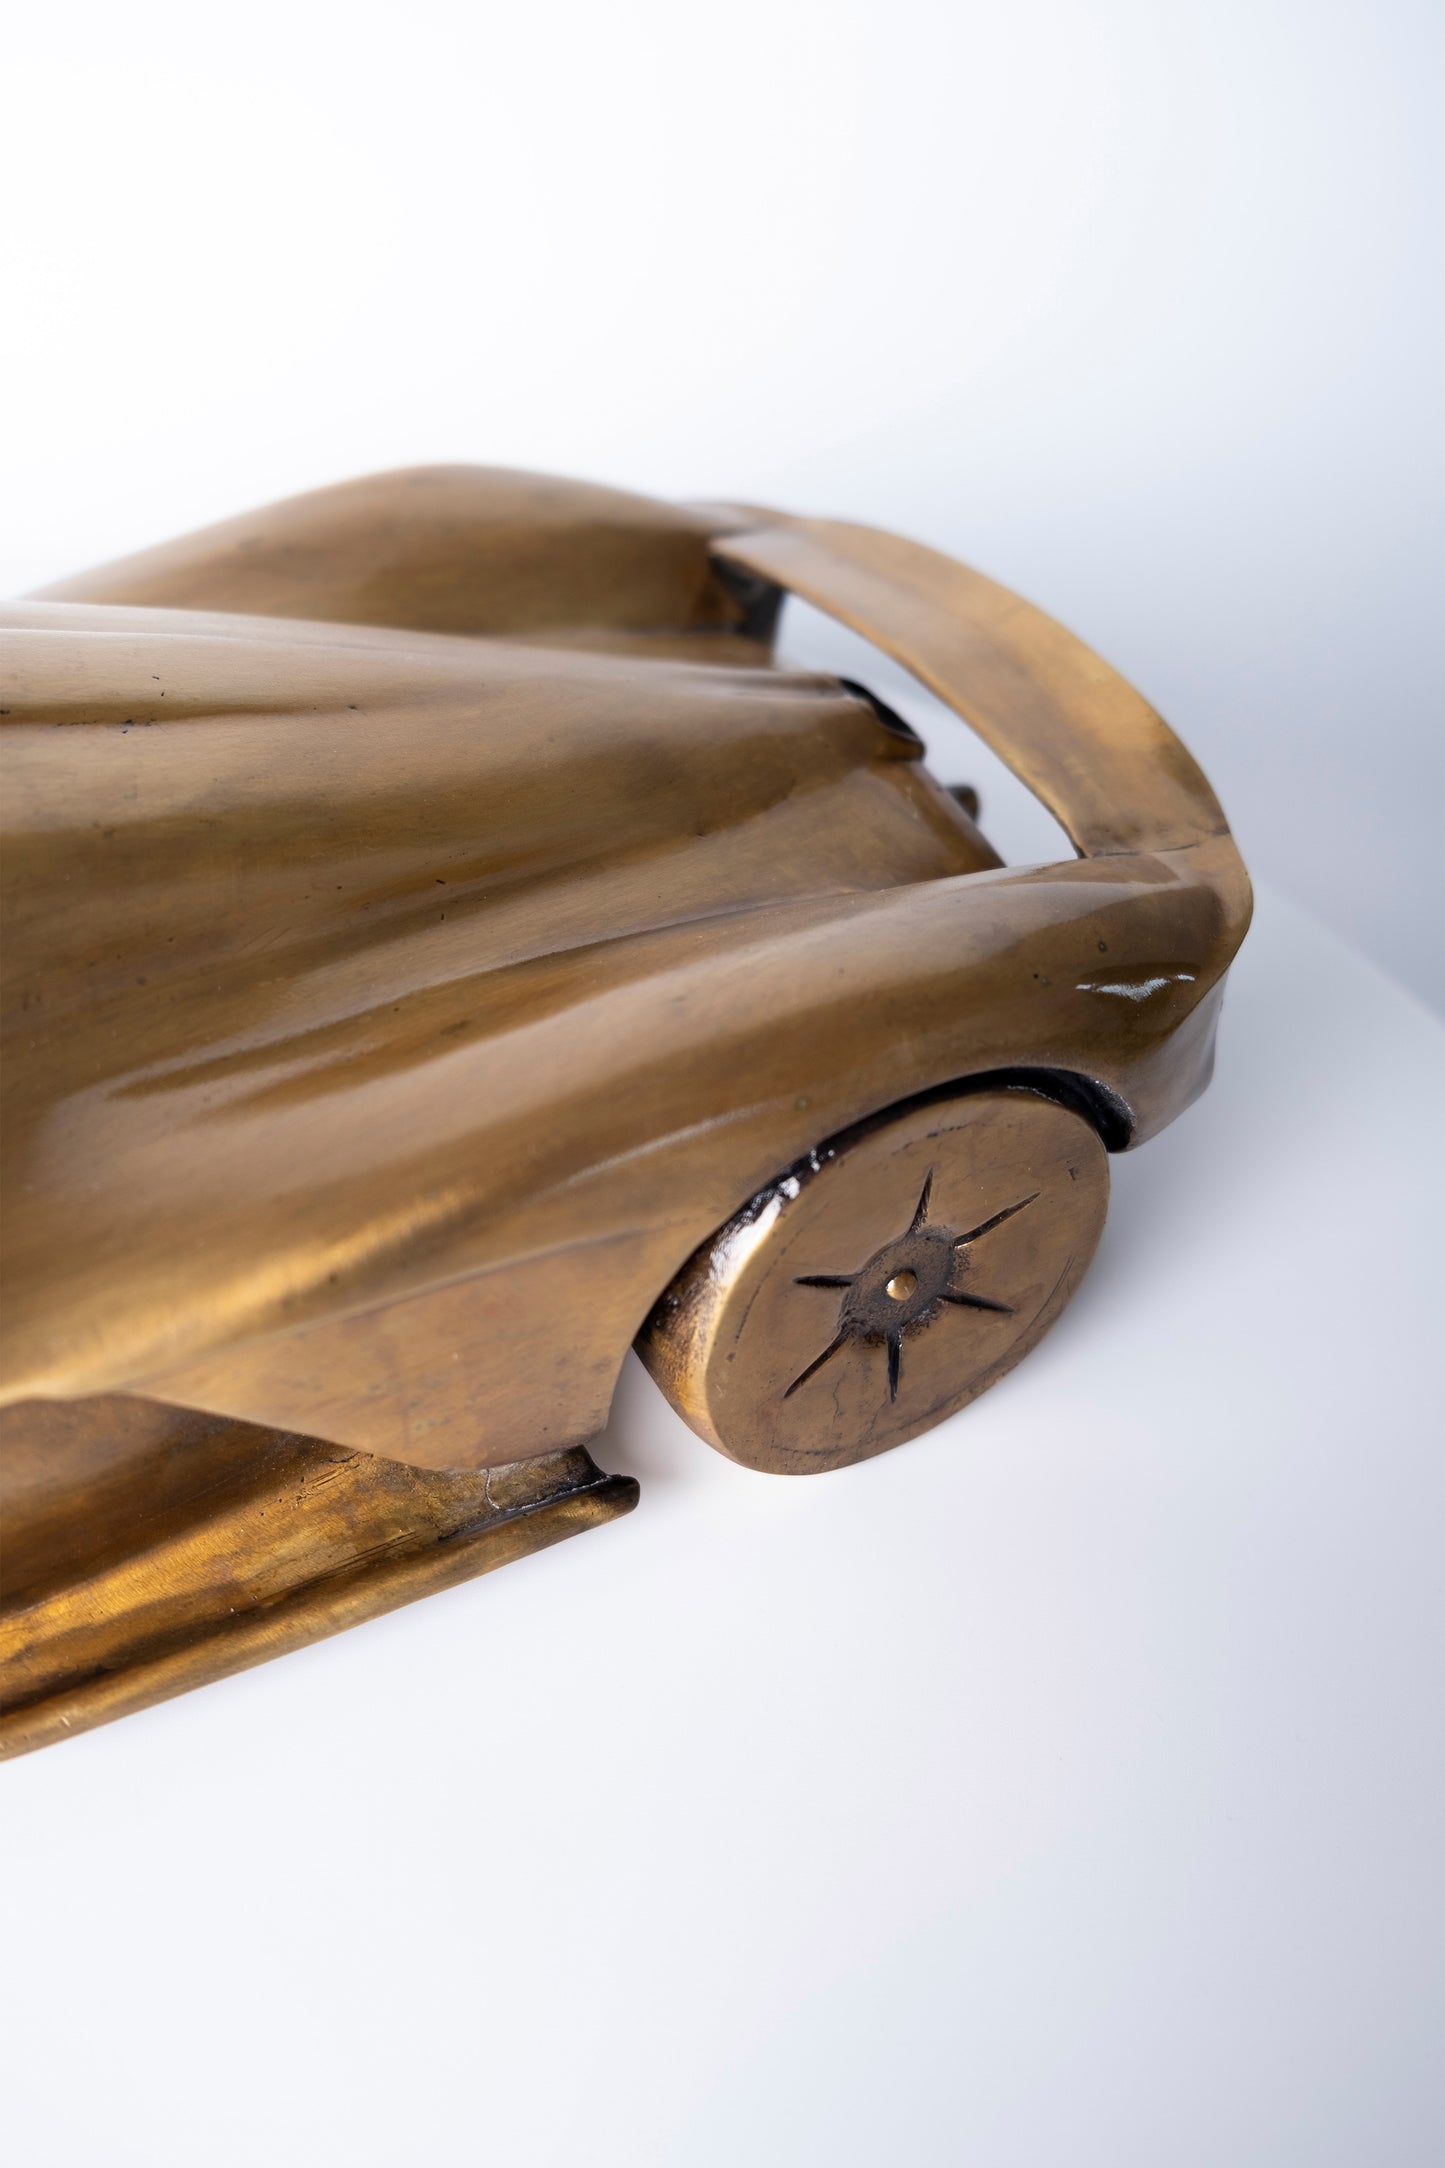 Handcrafted Gold Brass sports car